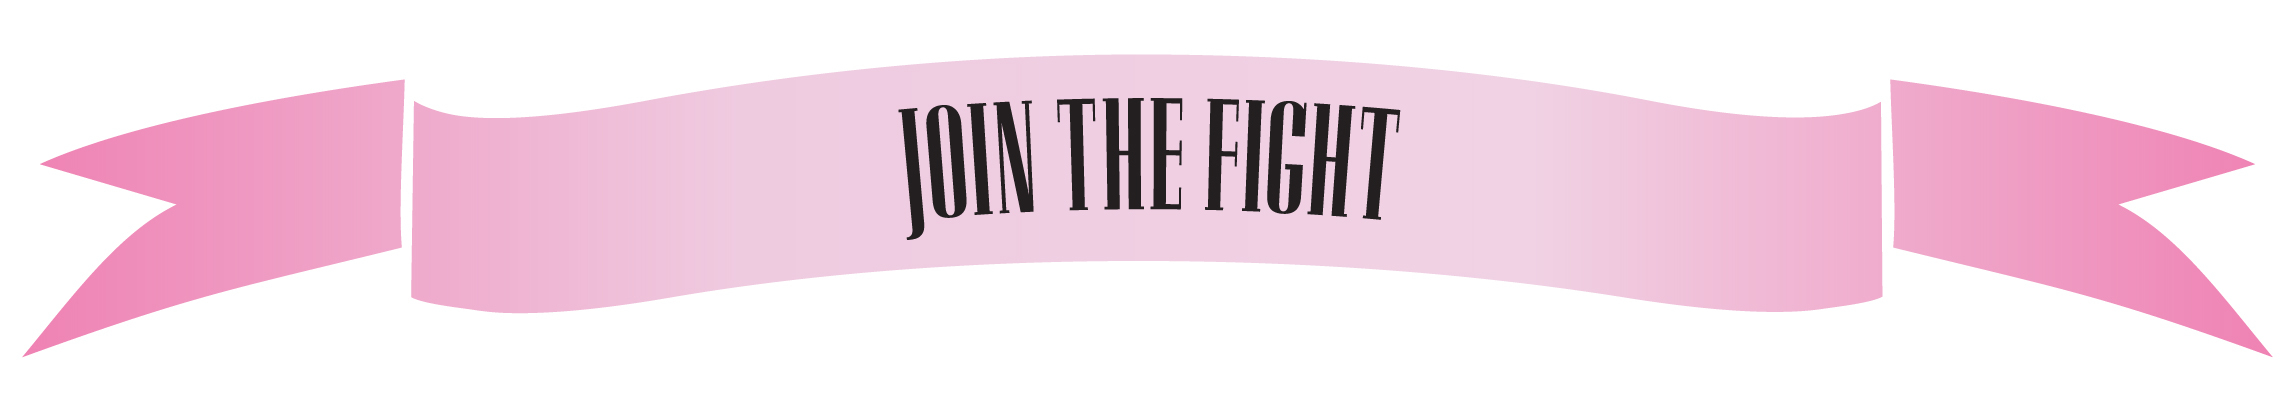 join-the-fight-01